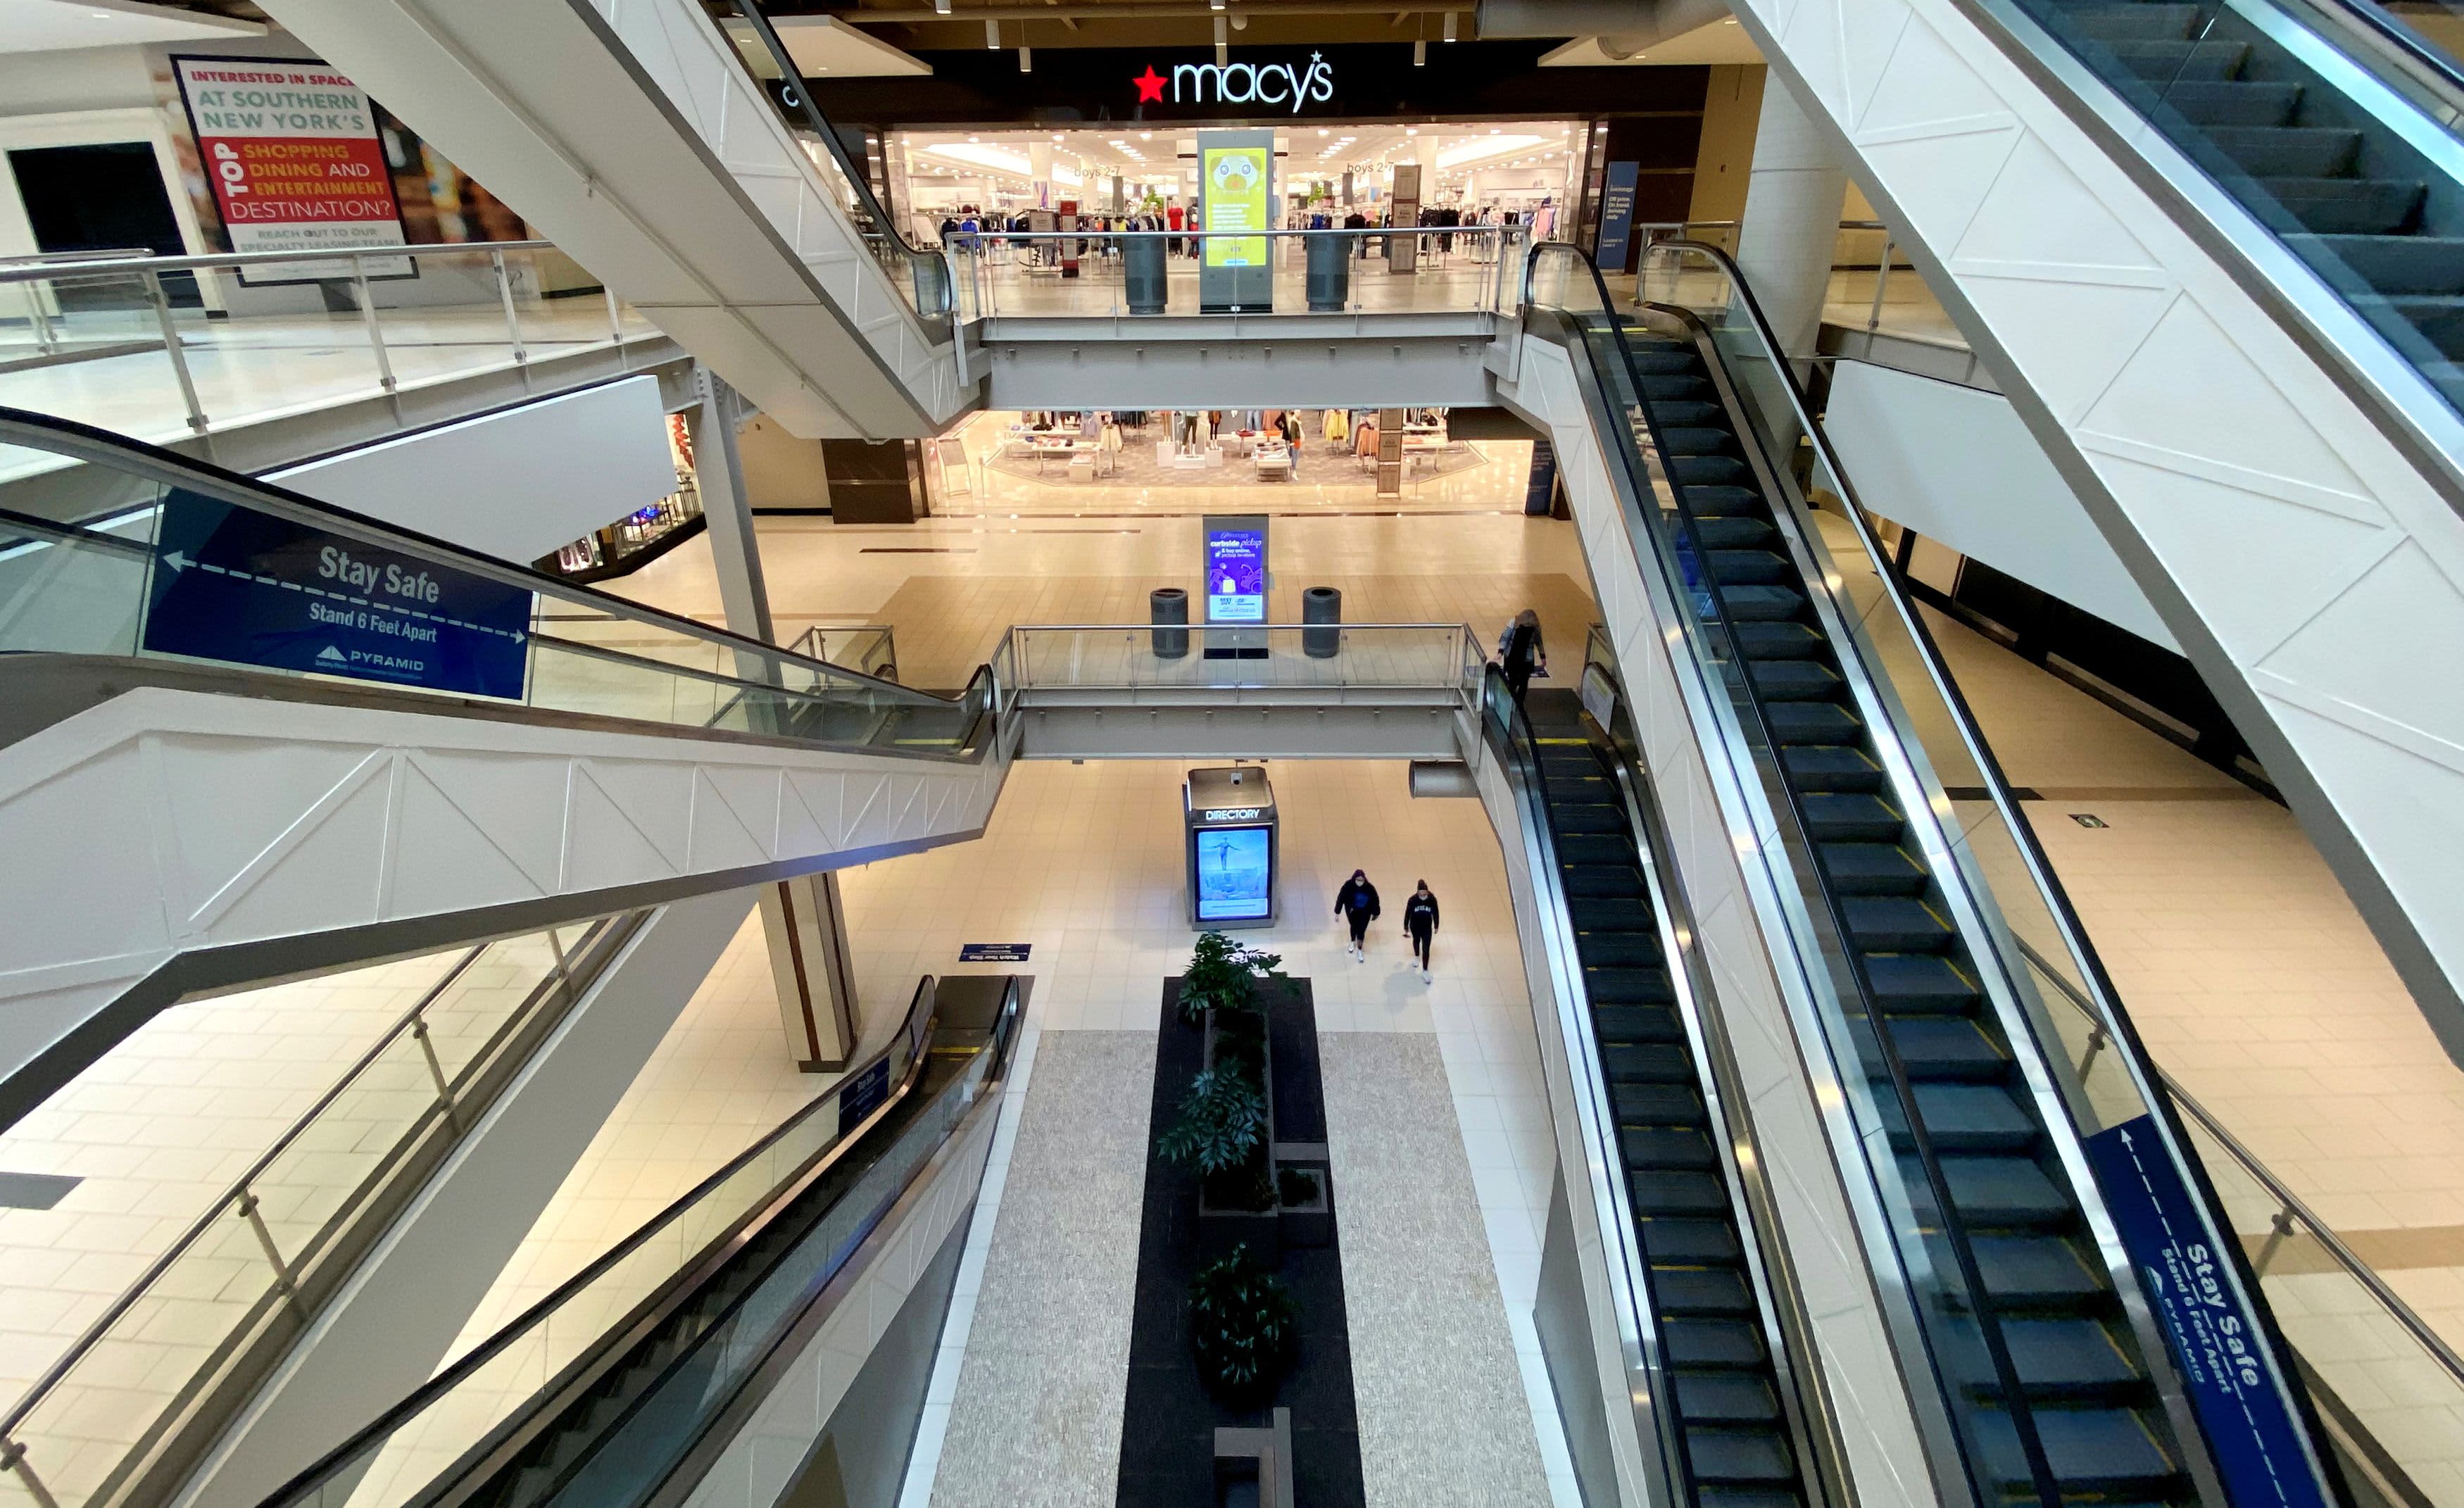 Vacancies in US malls are jumping at the fastest pace, reaching the maximum: Moody’s